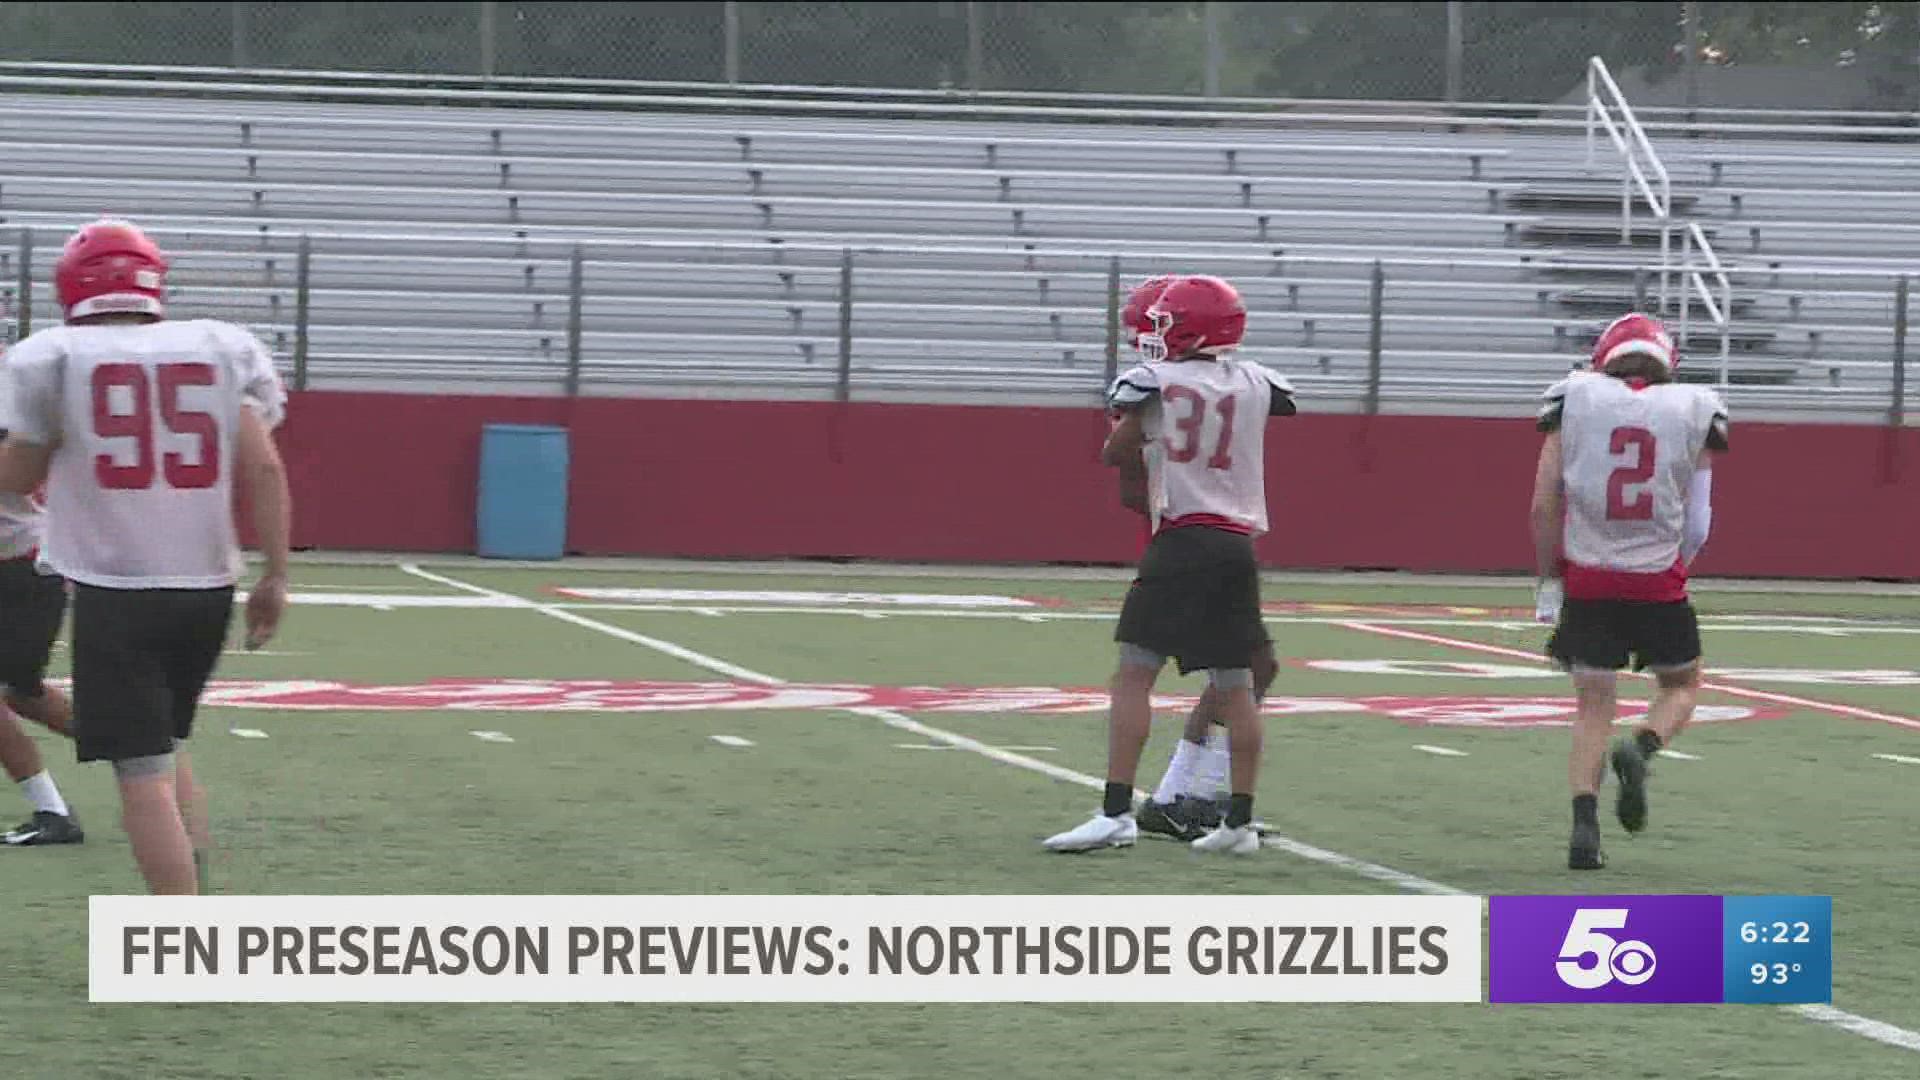 Football Friday Night previews: Northside Grizzlies